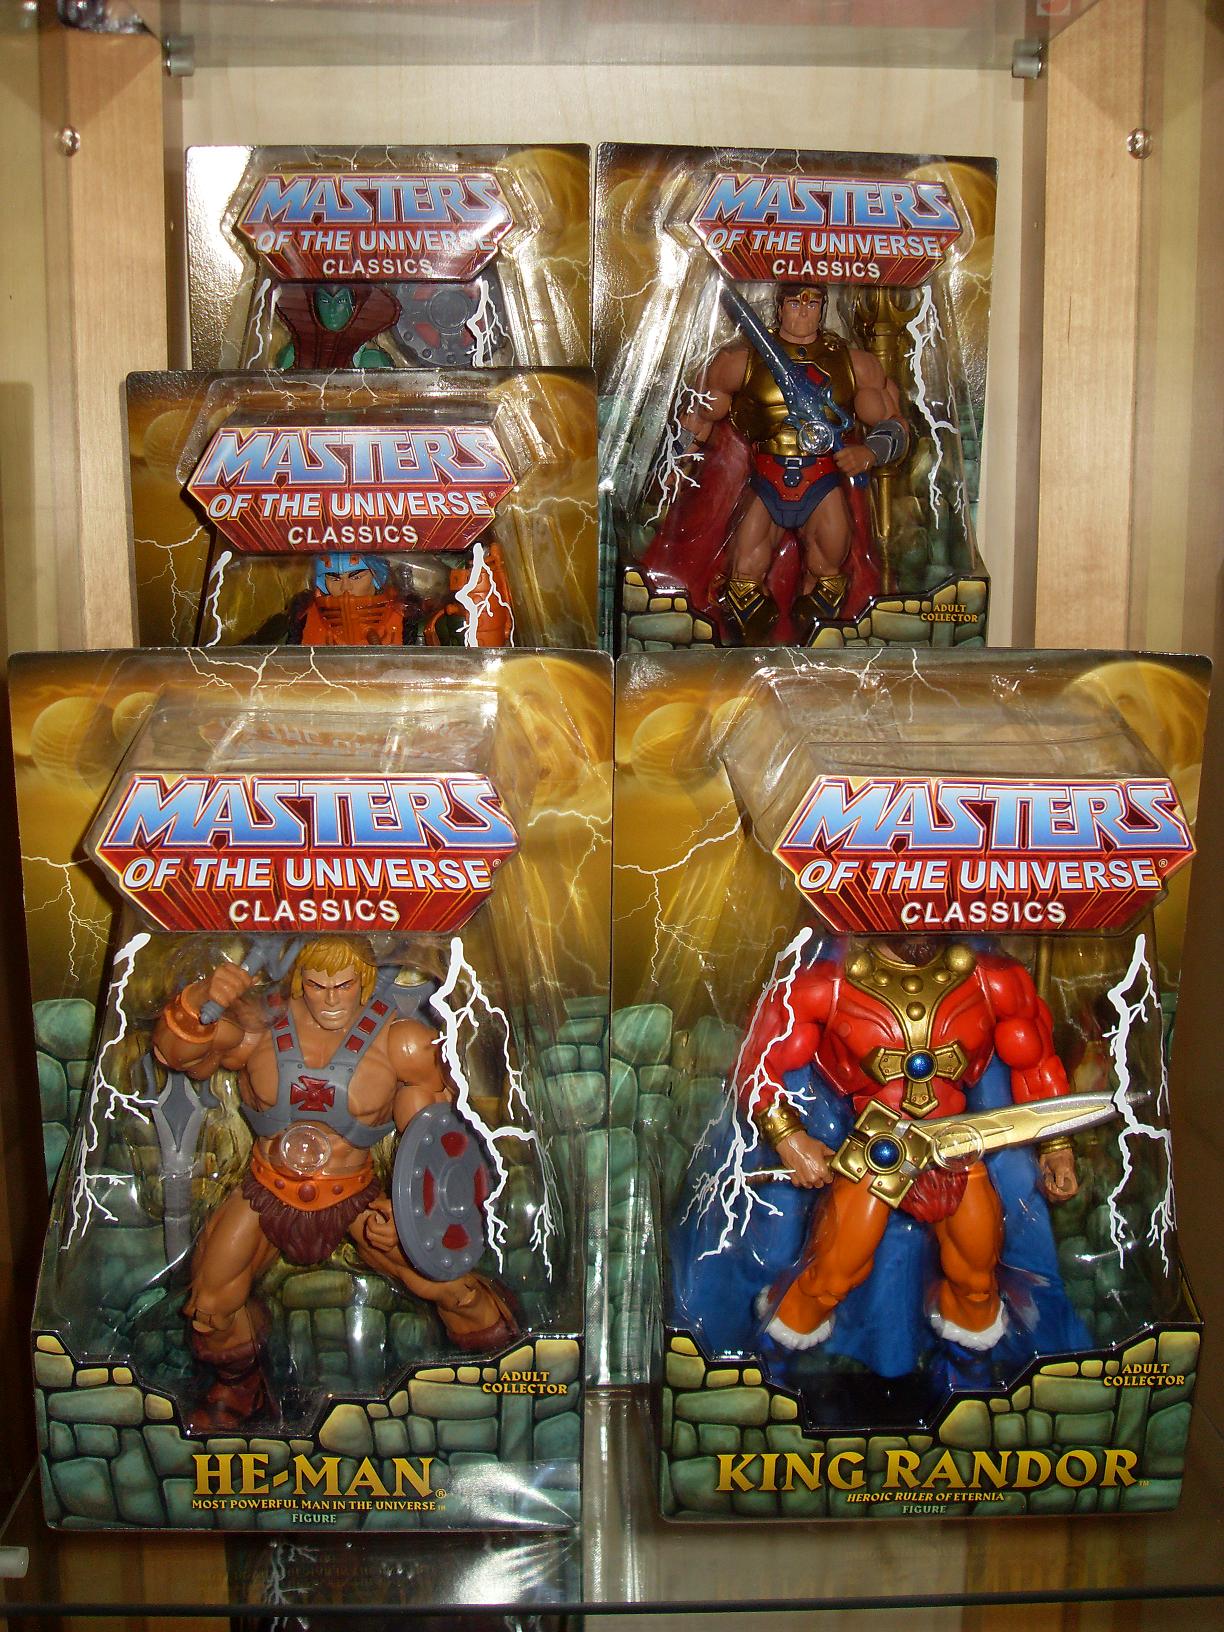 LORD HE-MAN Colecction 8438